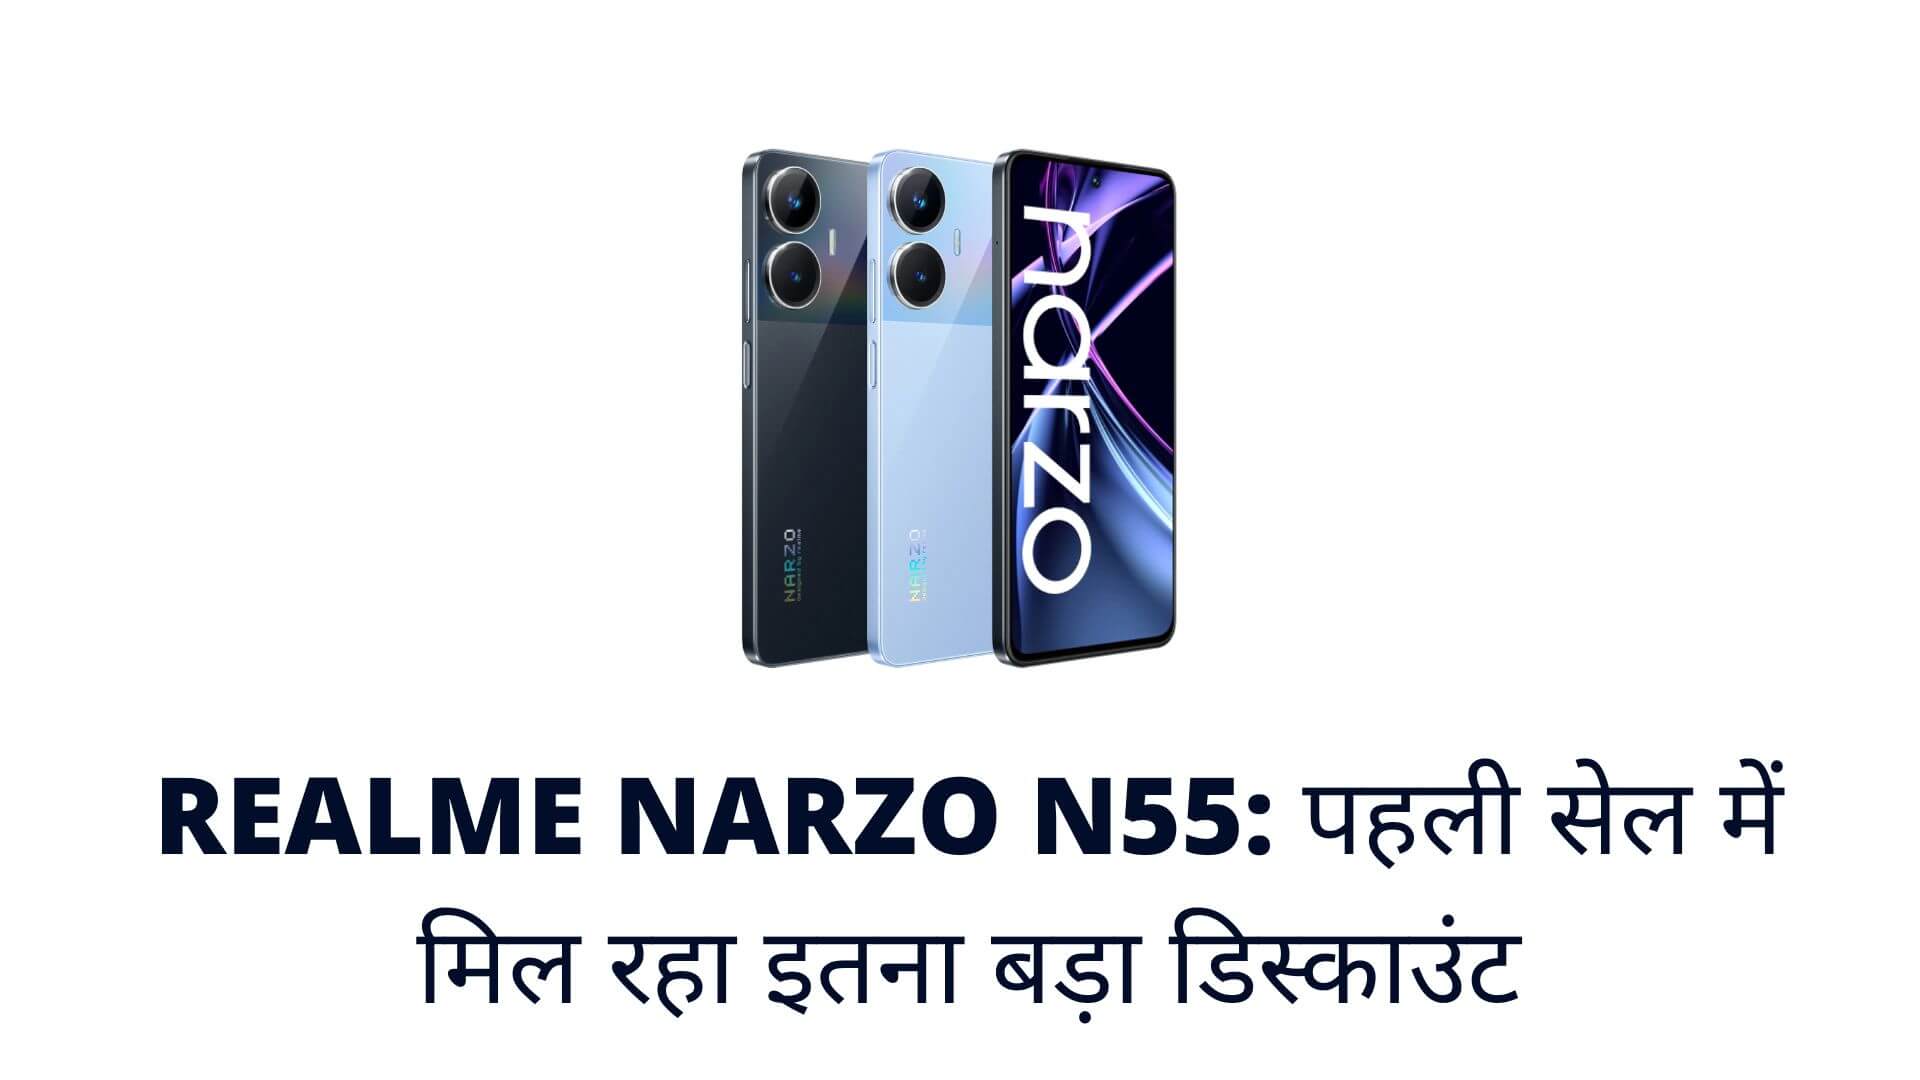 Don't Miss Out on This Realme Narzo N55 Discount: Here's How to Save Rs 2,000